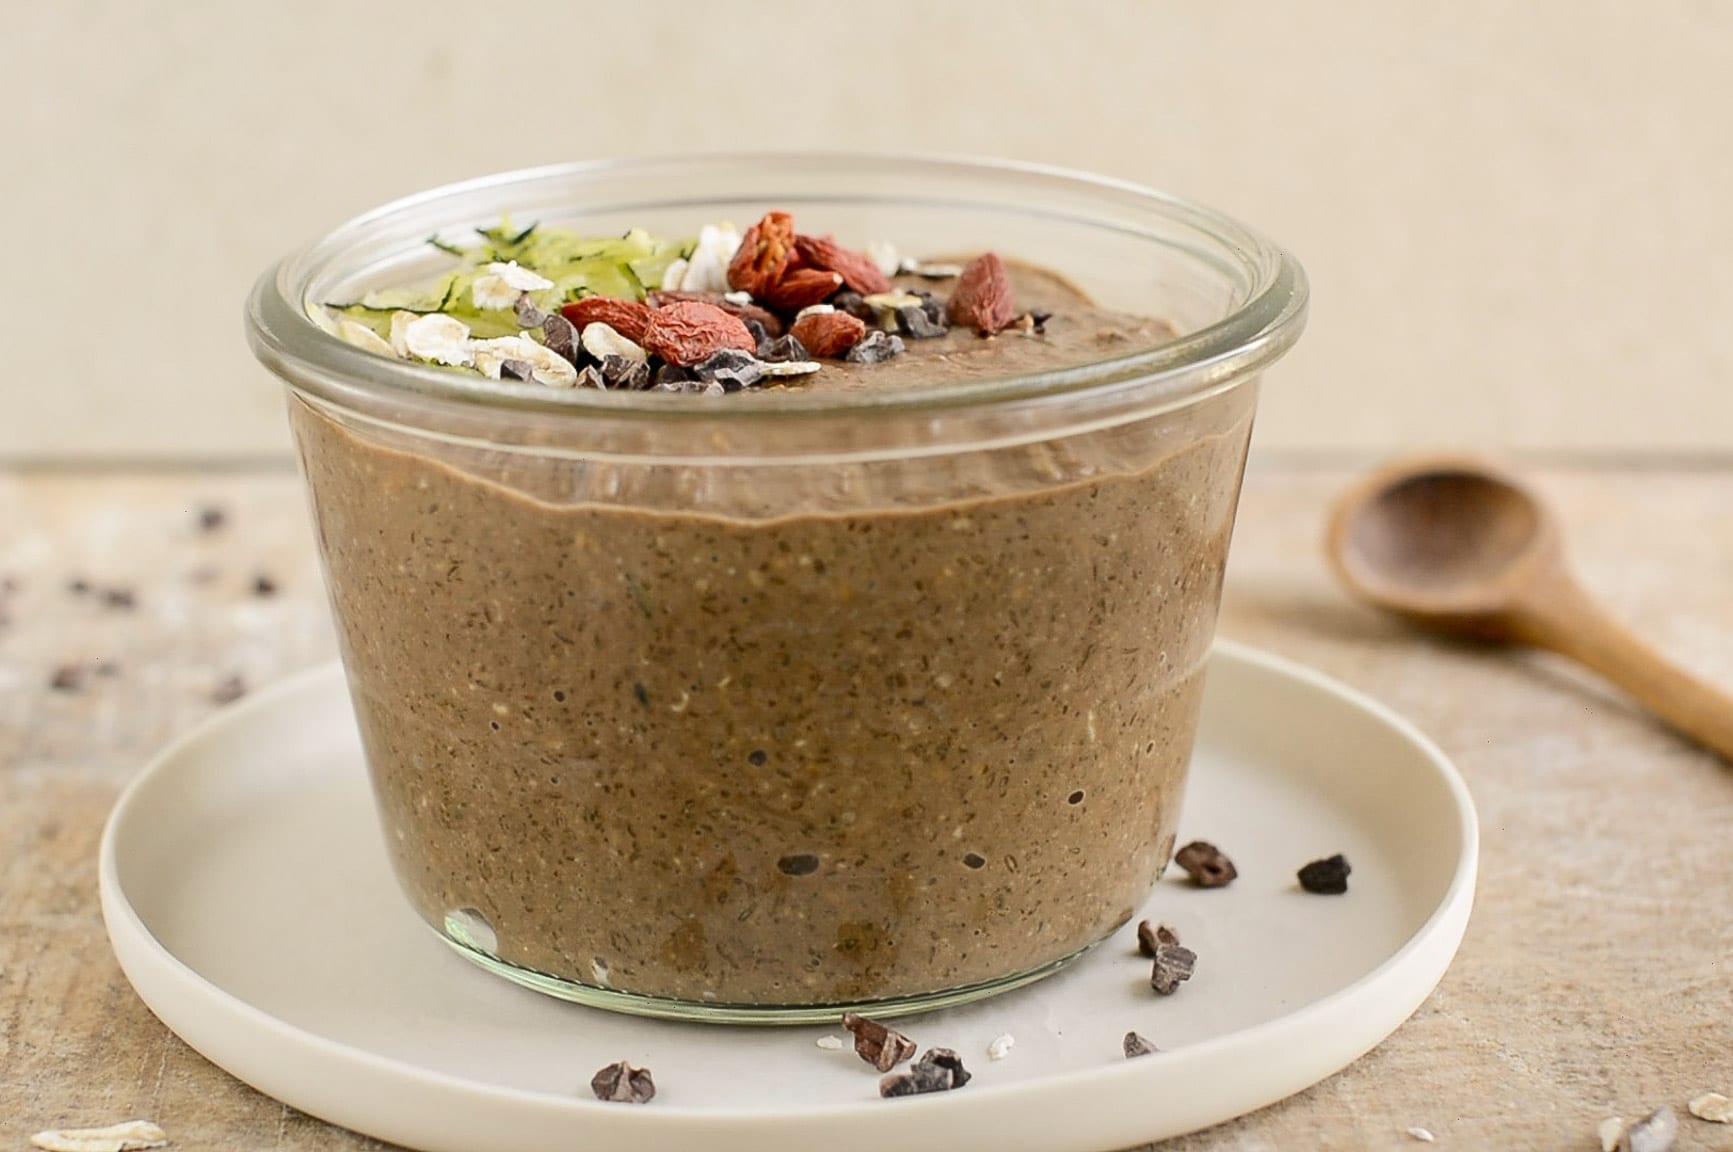 How to Make Low-Glycemic Chocolate Overnight Oats Video.